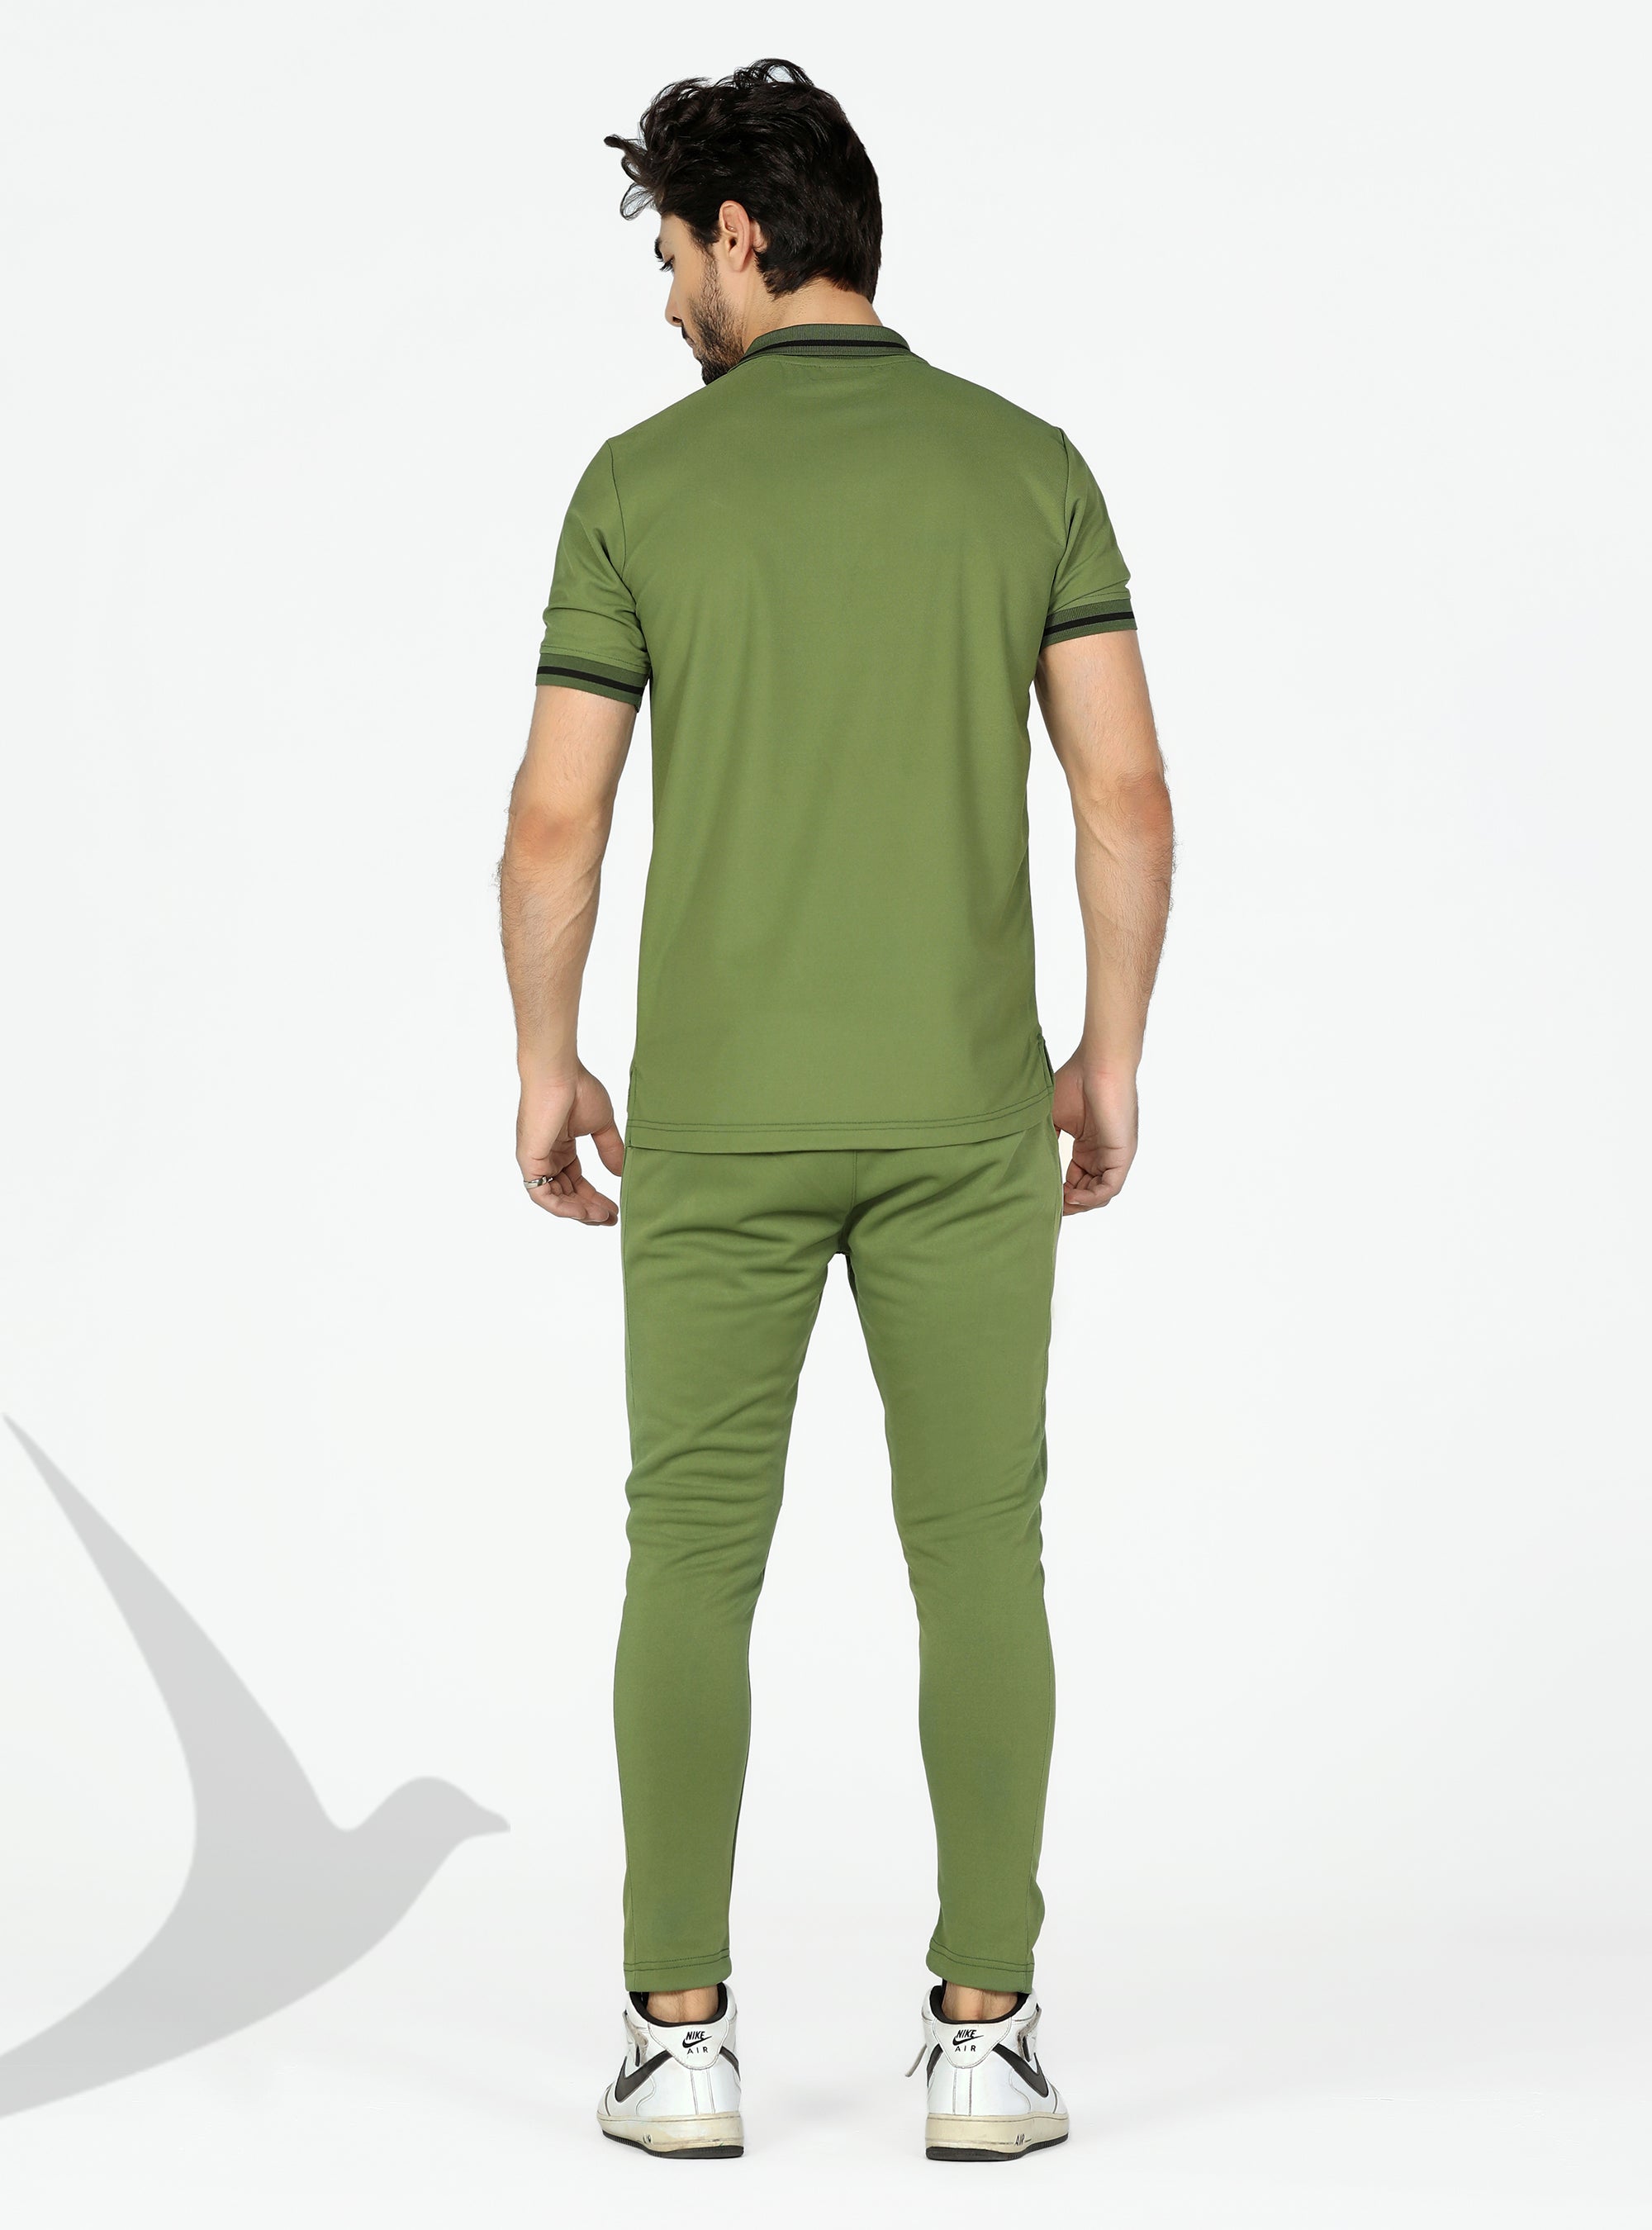 Green trouser with reflective lining